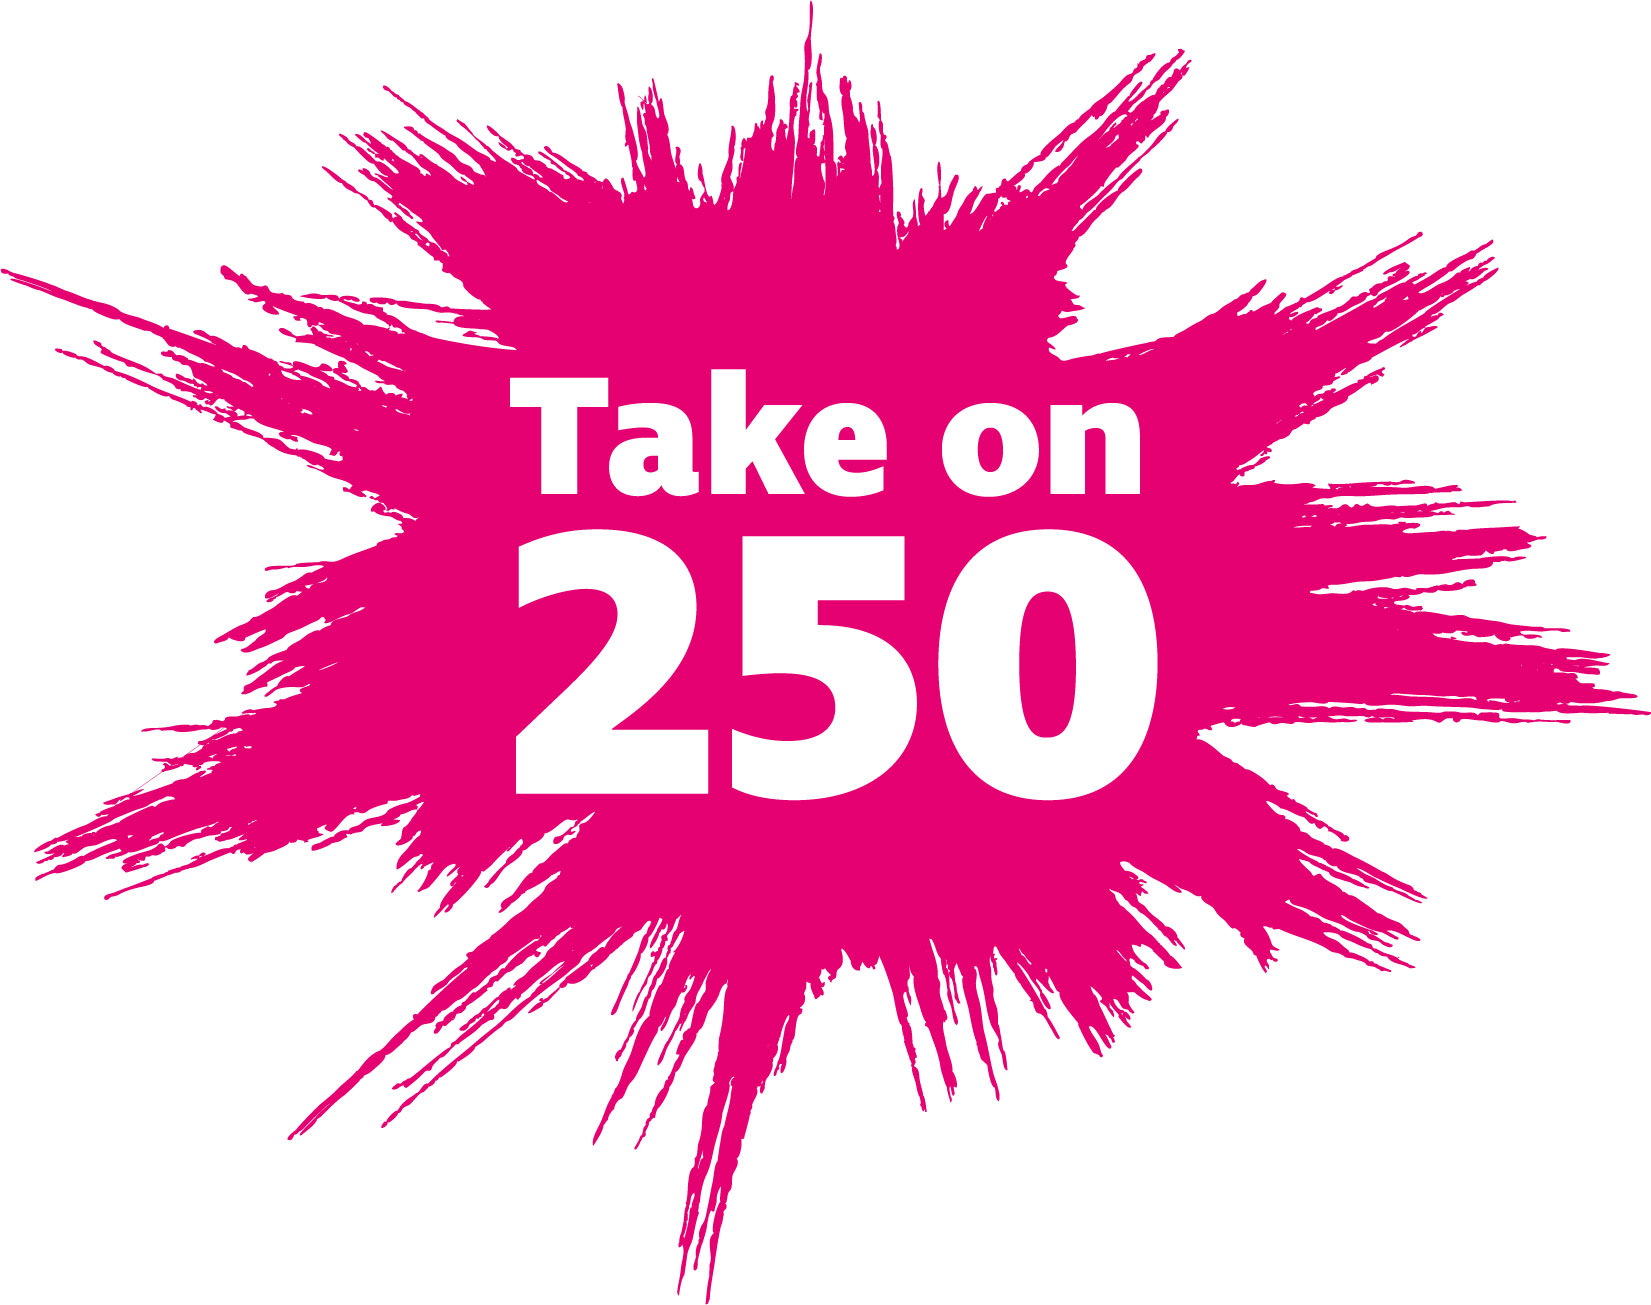 Take on 250 logo with pink splash in the background.